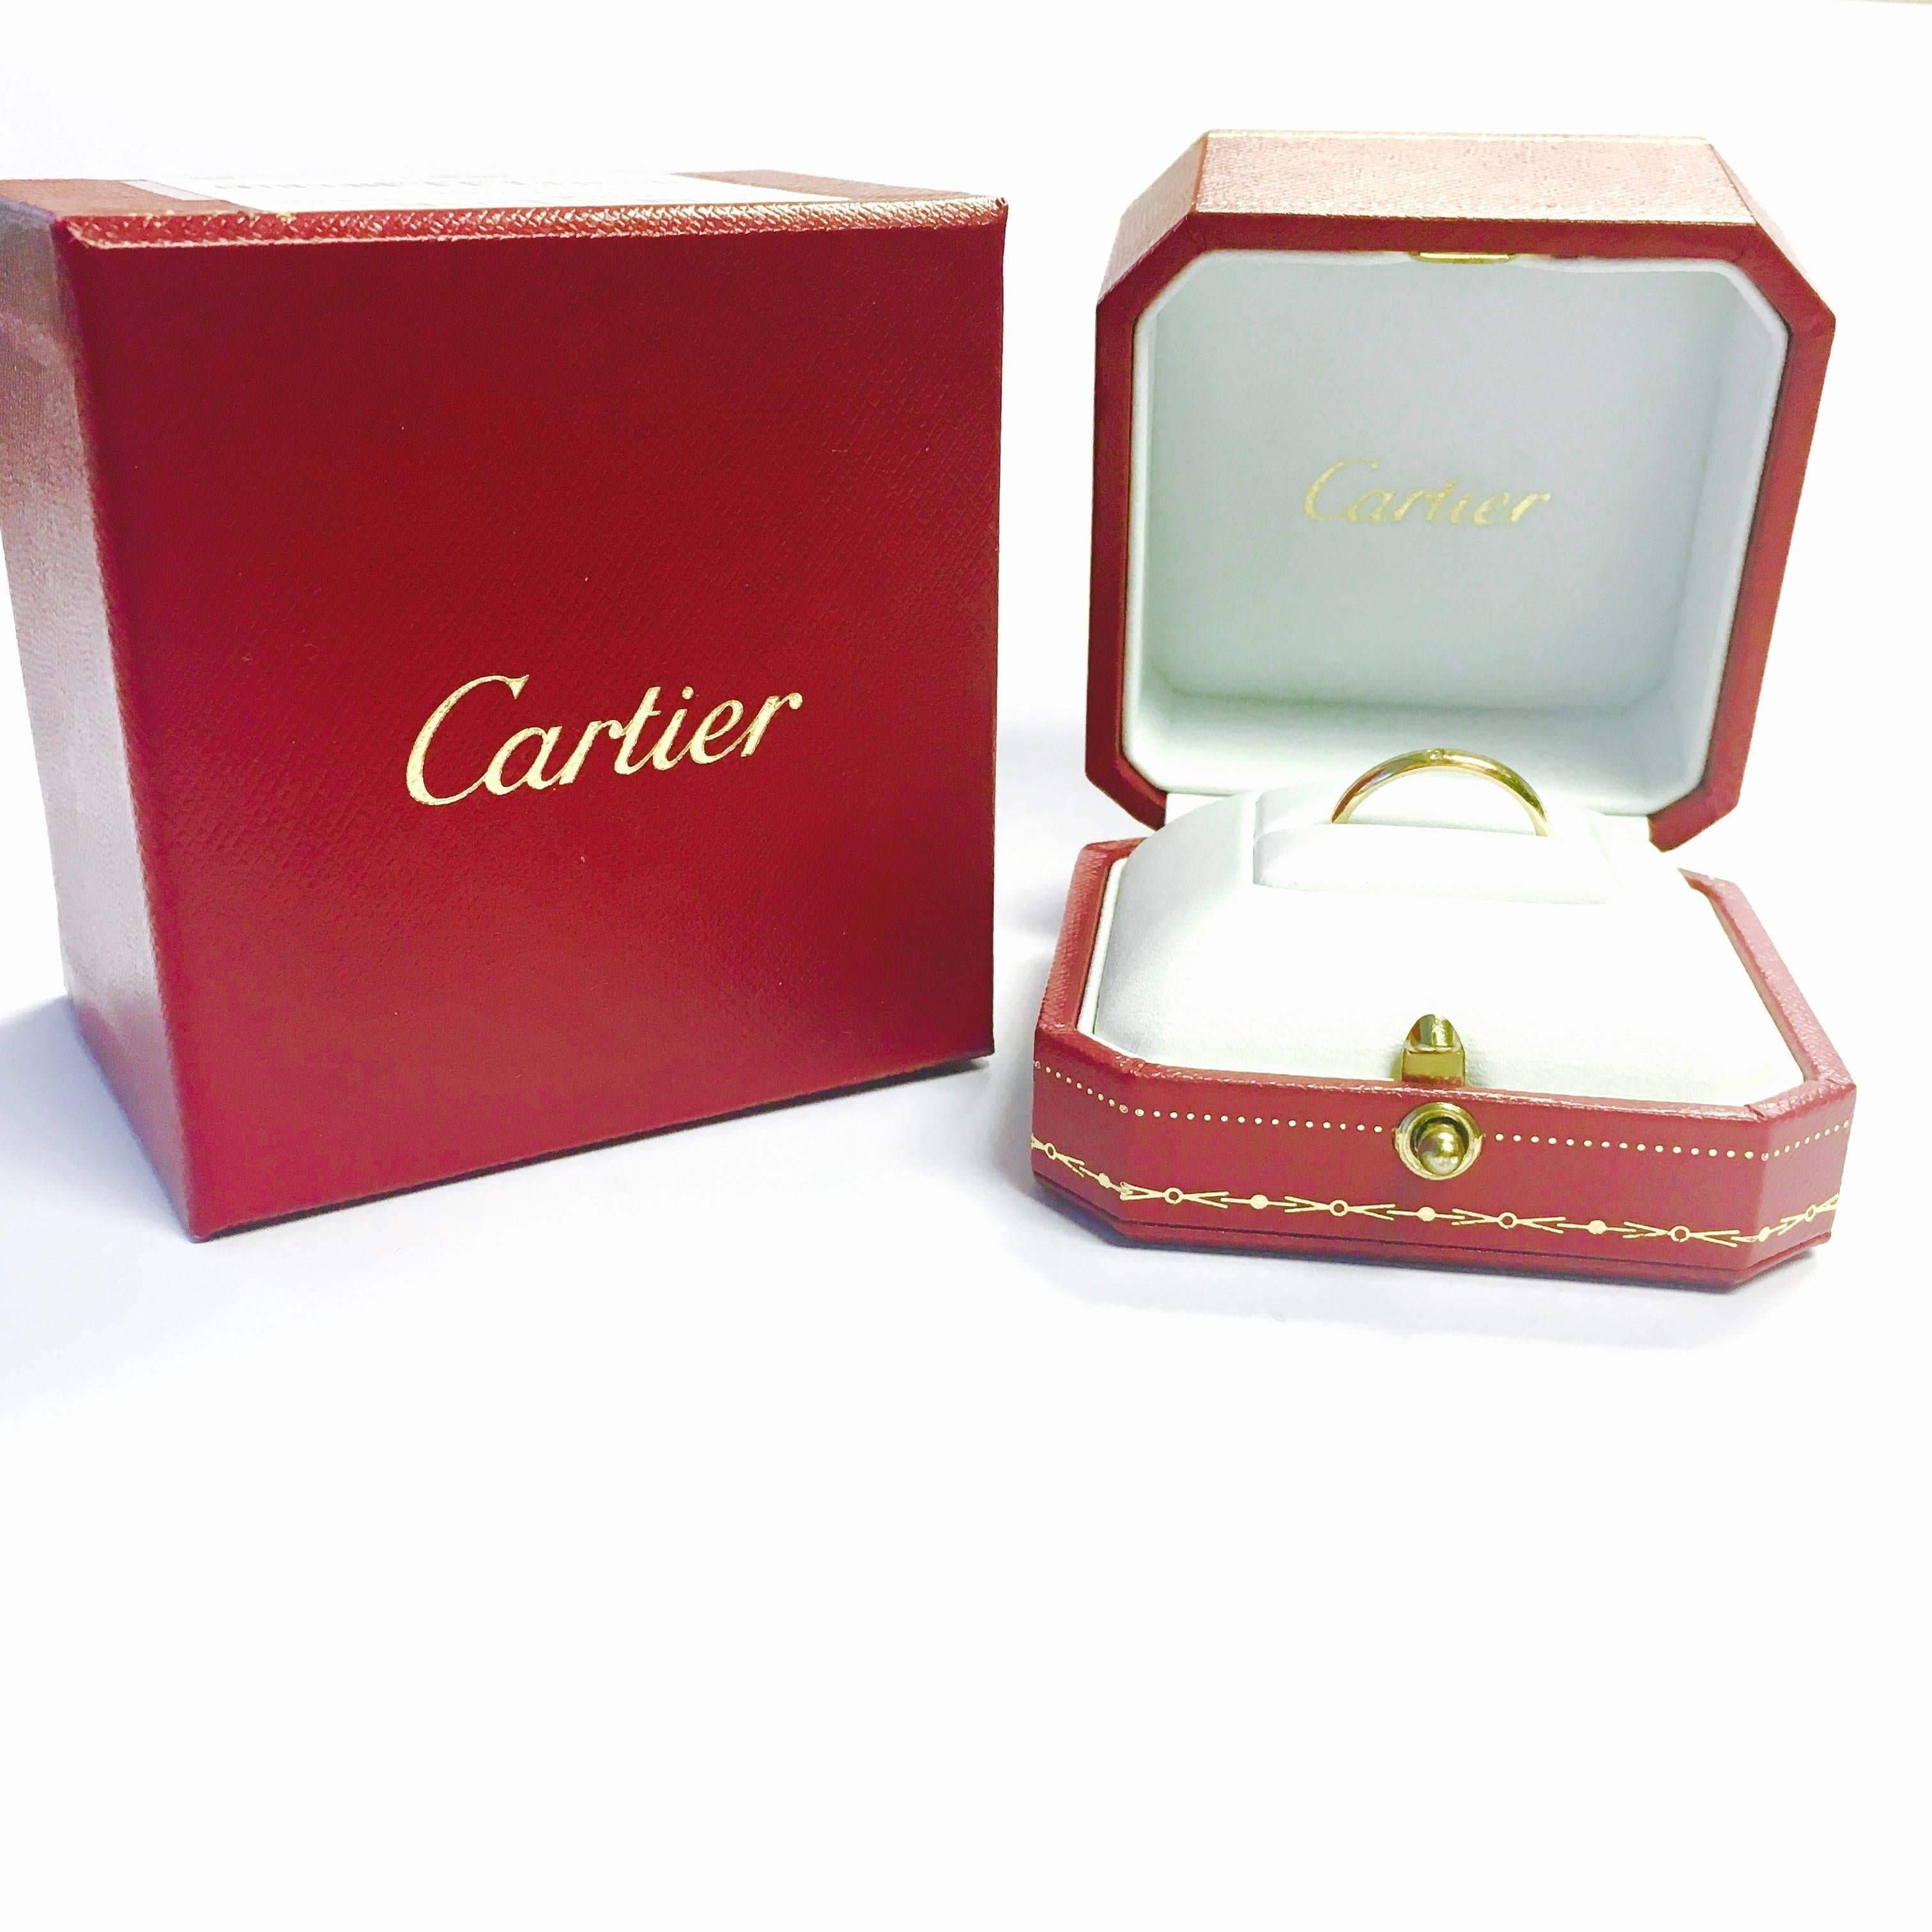 Elegant wedding band ring by Cartier. Crafted in 18K yellow gold in a high polished finish and has one 0.02 ct round brilliant cut diamond flush set at the front. 

Hallmark: Cartier Au750 YR4553
Measurements: 2.5mm Width
Size: US: 7.25 European: